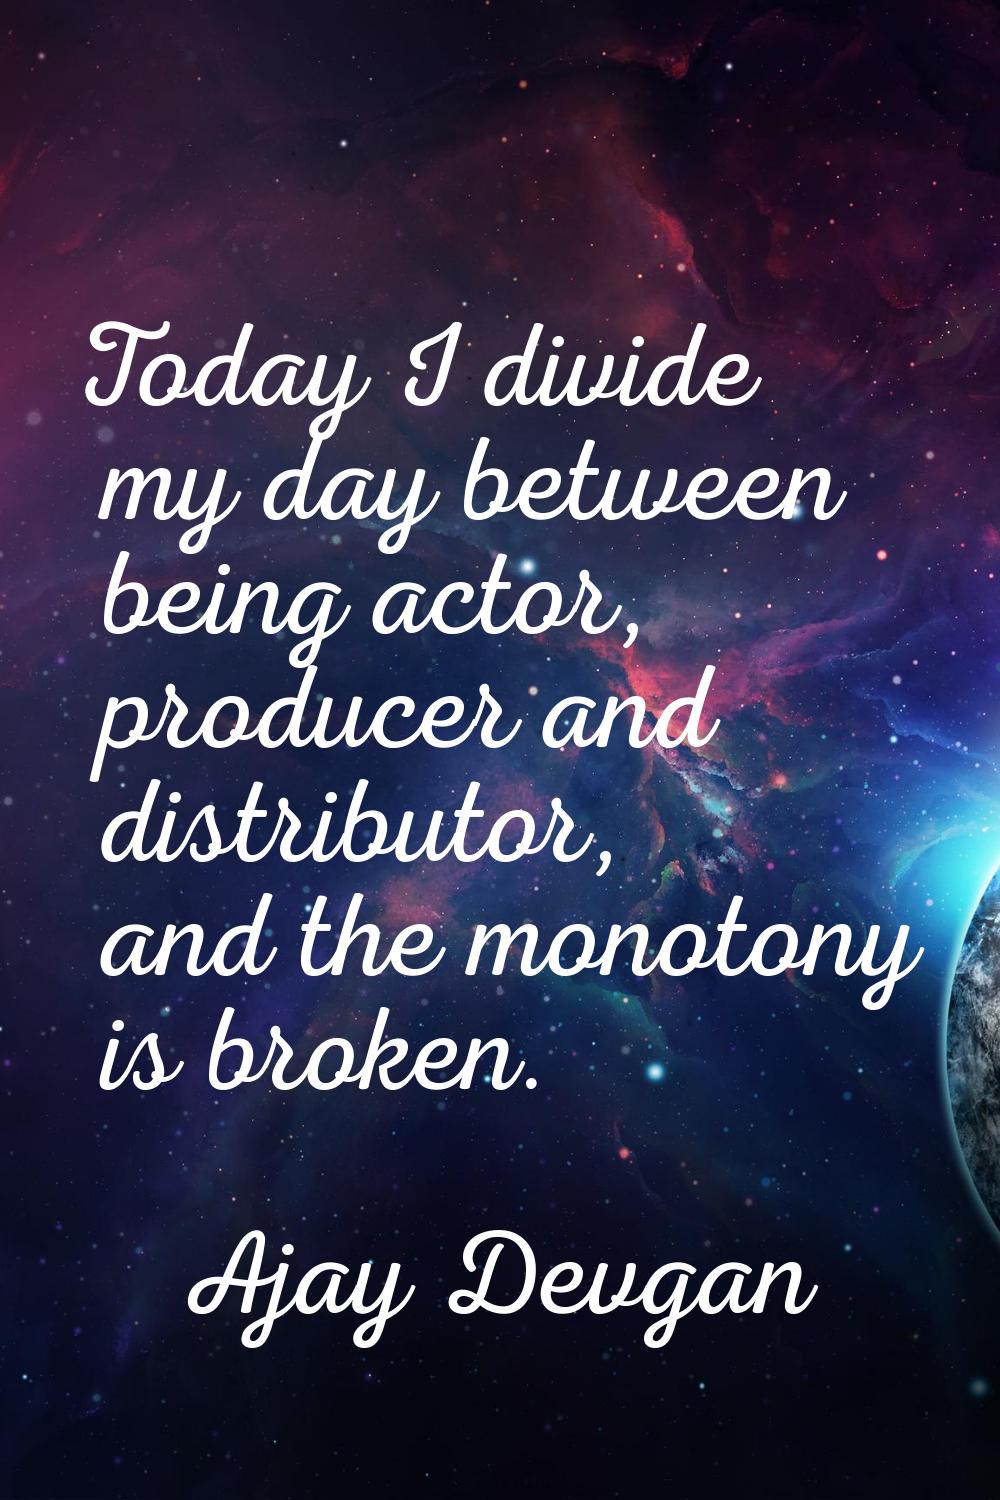 Today I divide my day between being actor, producer and distributor, and the monotony is broken.